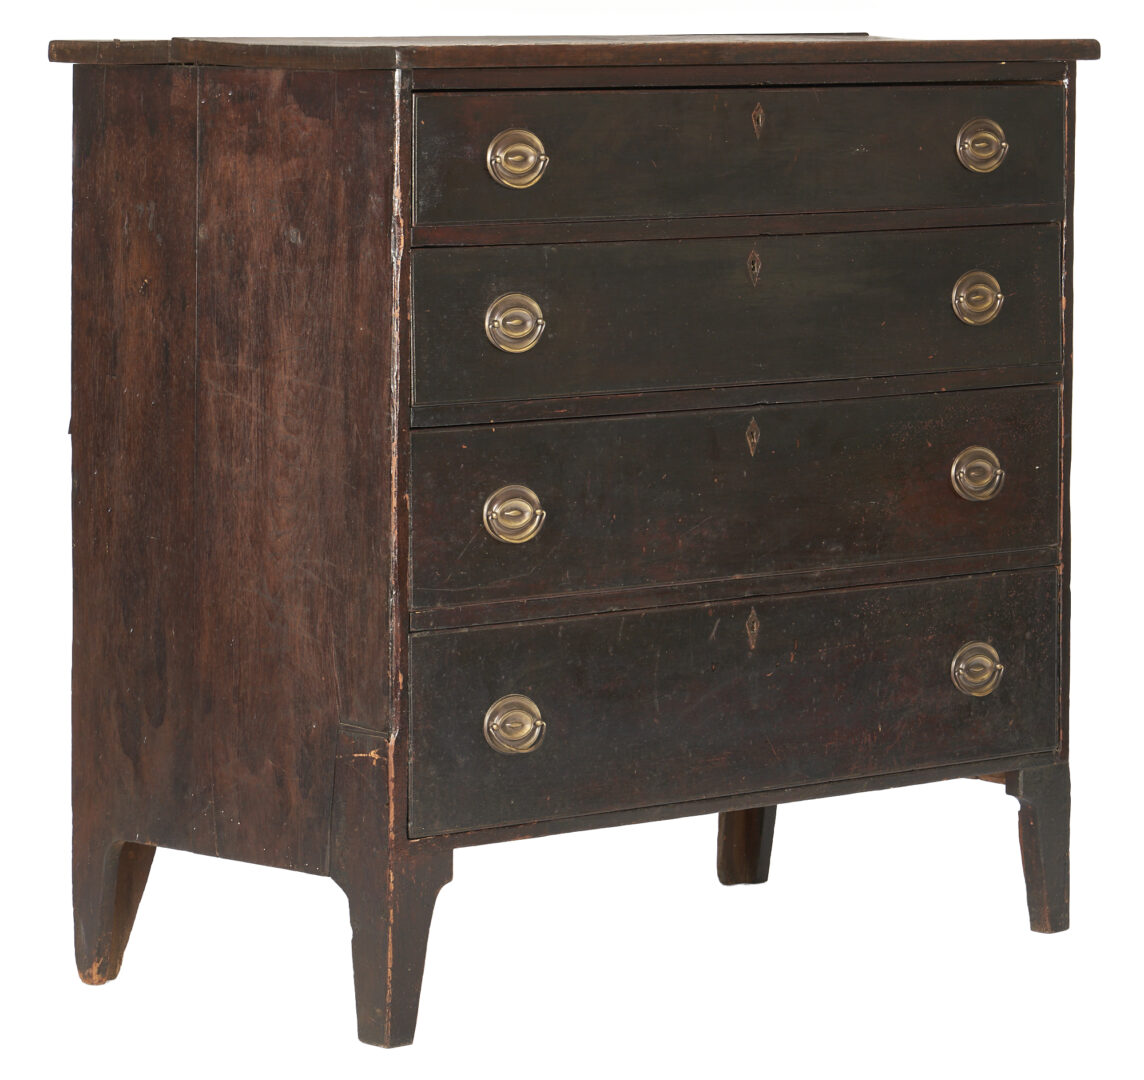 Lot 157: Southern Federal Chest of drawers, c. 1815